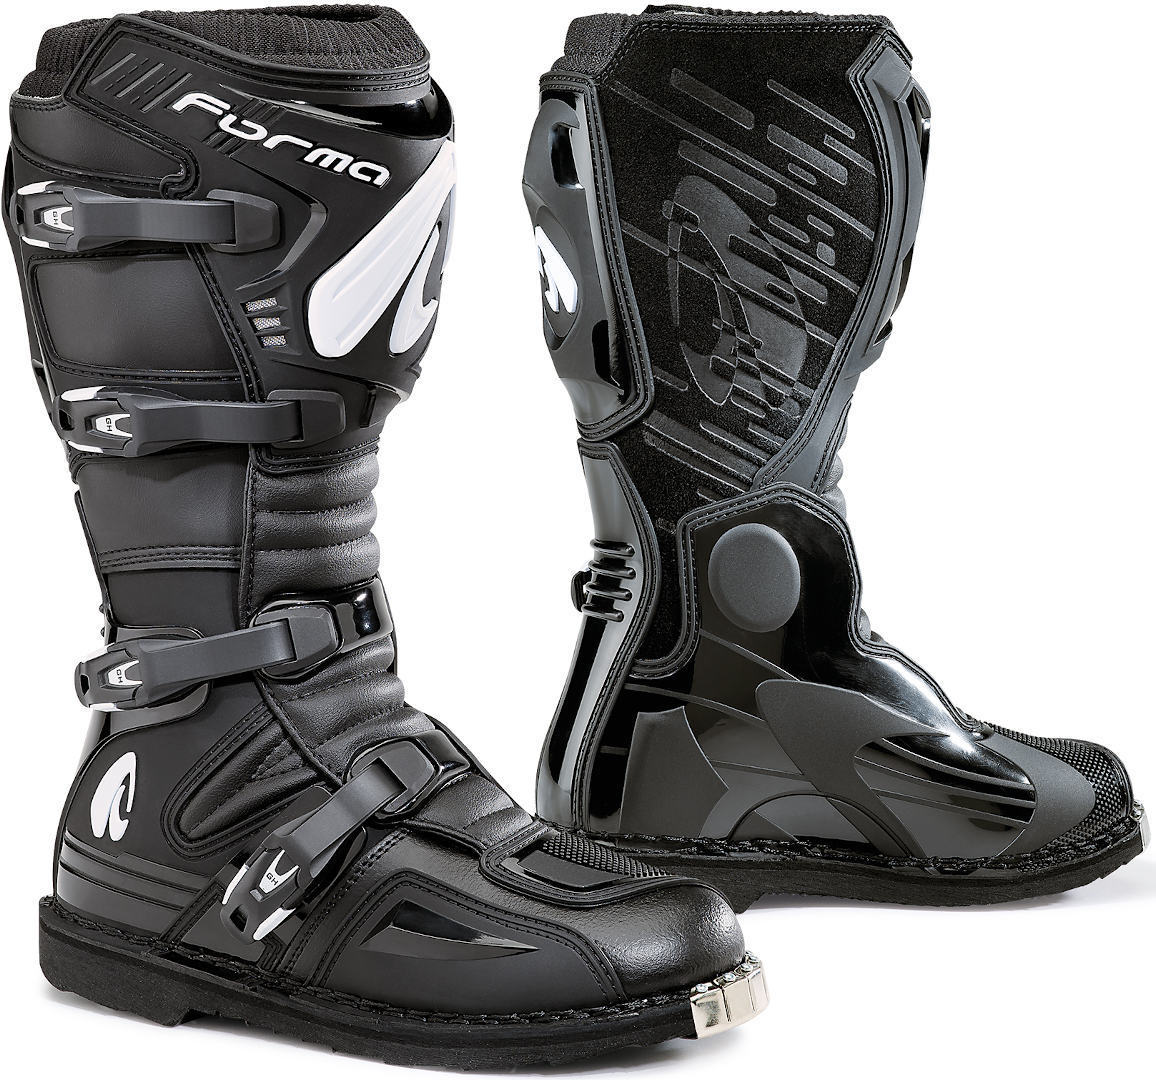 Buy Forma Terrain Evo Boots Online with Free Shipping – superbikestore